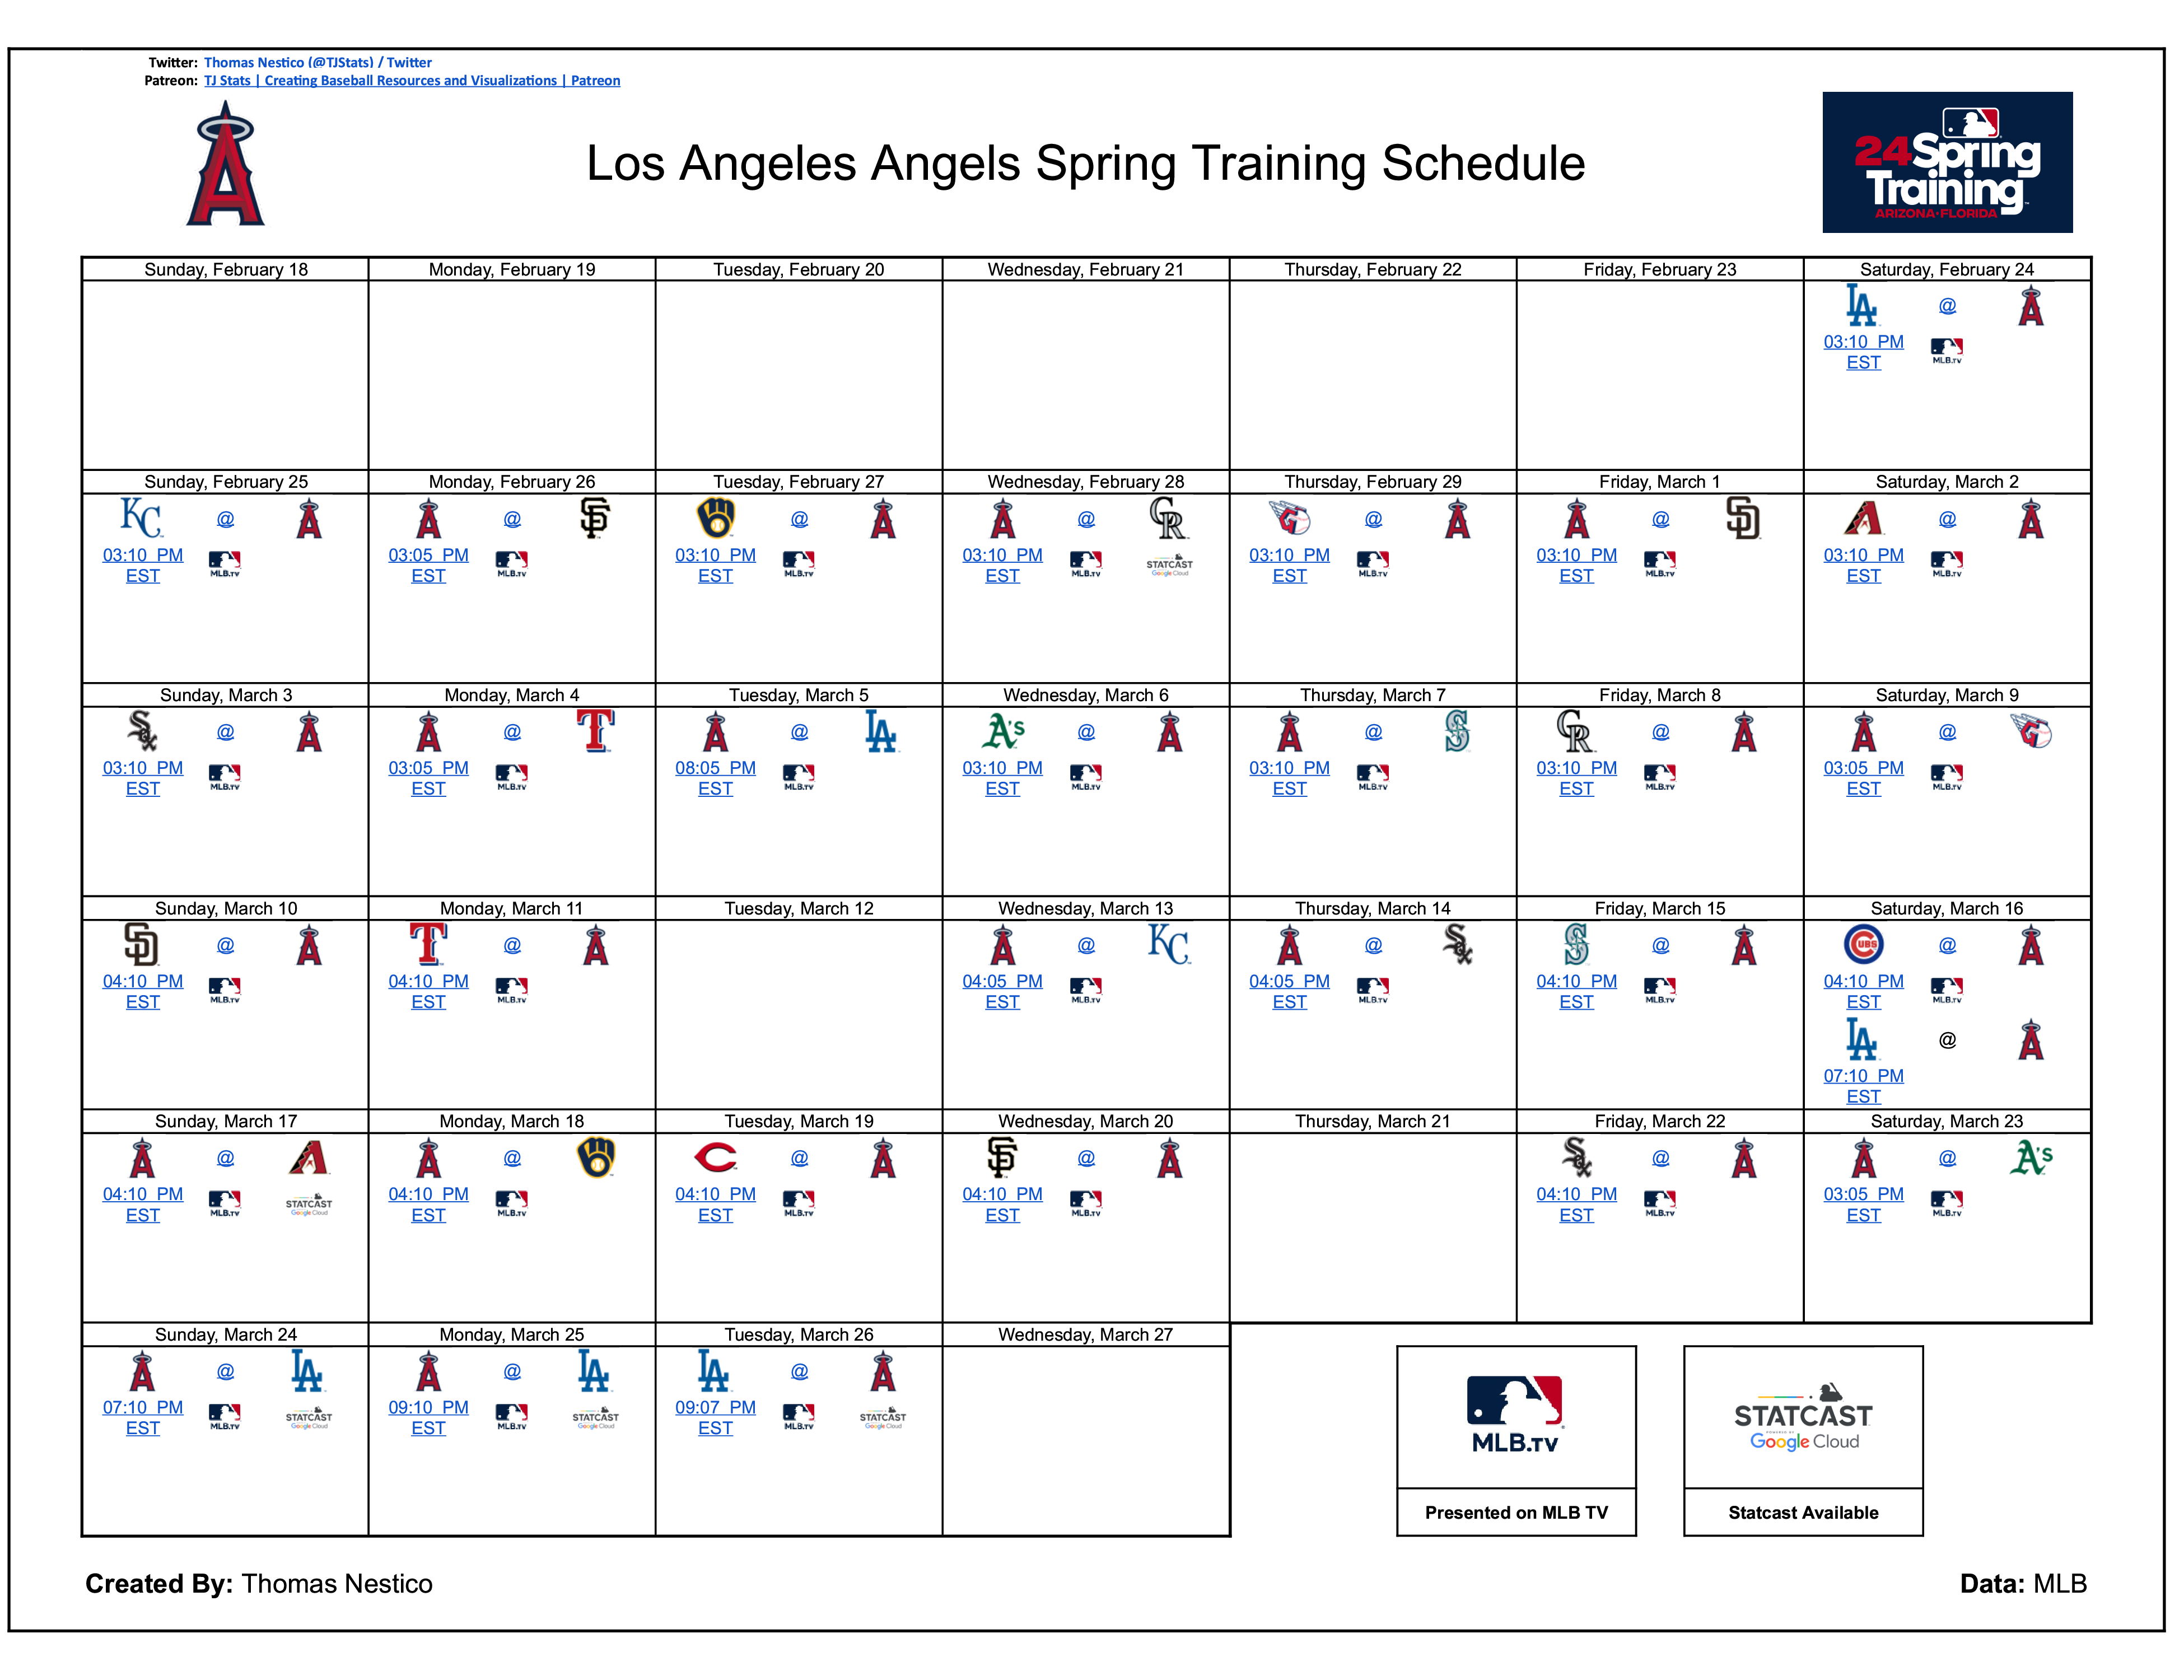 Los Angeles Angels Spring Training Schedule (MLB TV and Statcast Games Indicated)